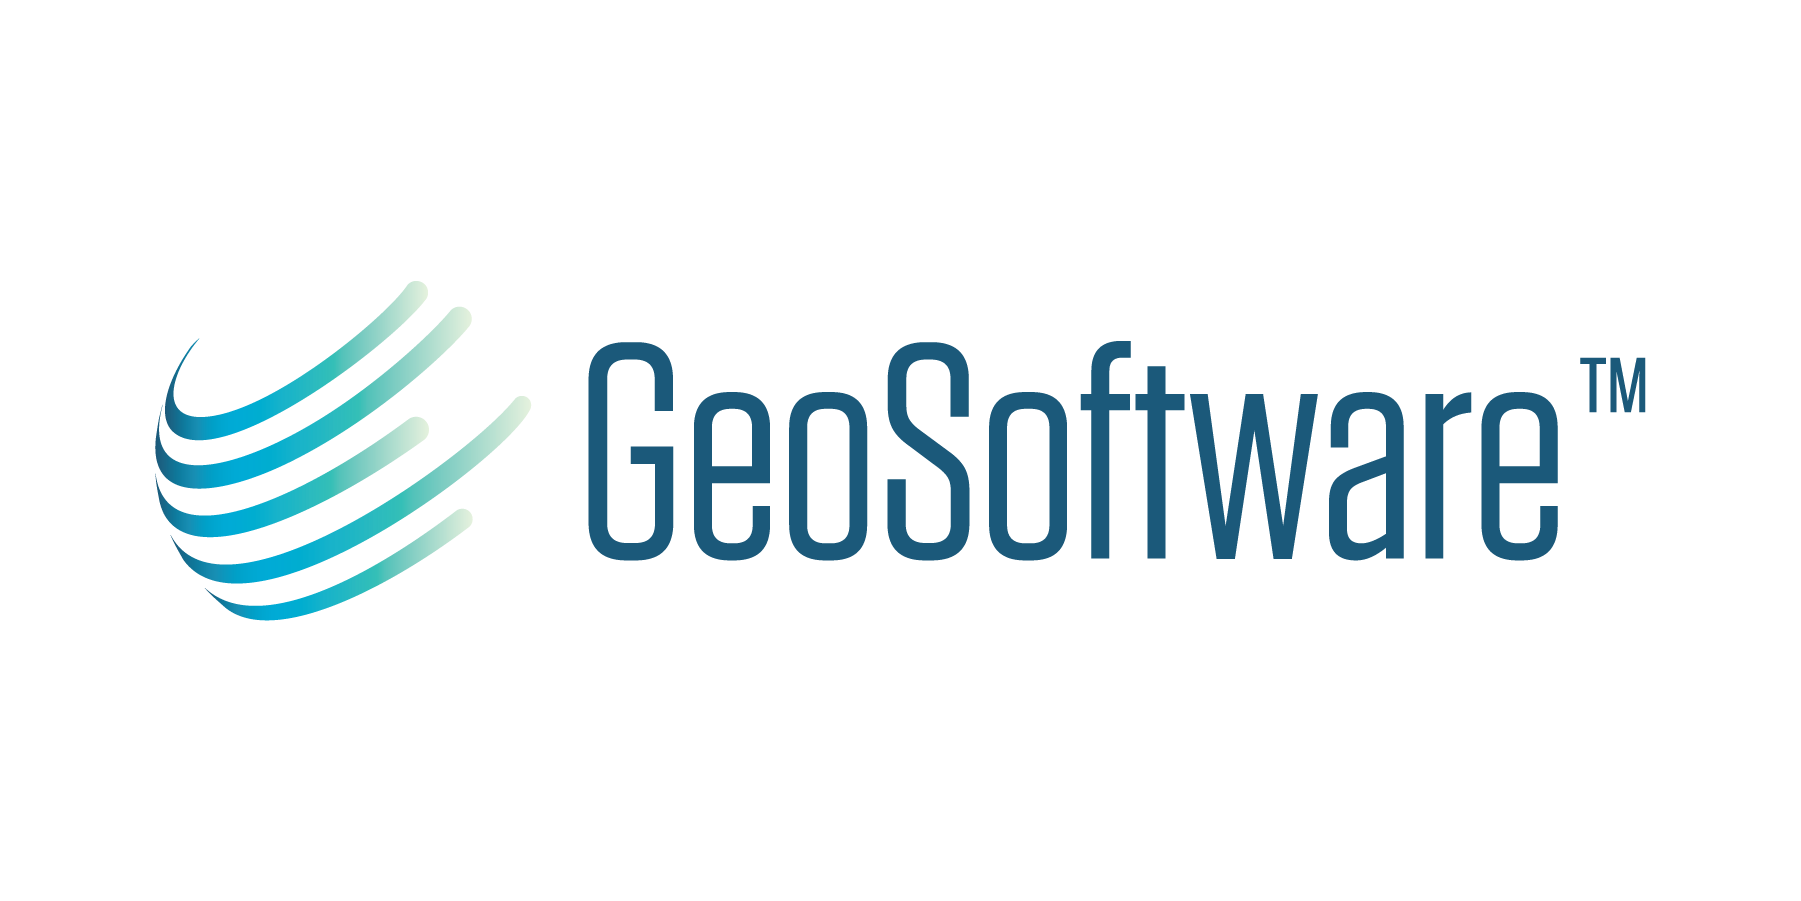 GeoSoftware & Geoactive collaborate to provide enhanced subsurface technology solutions. 